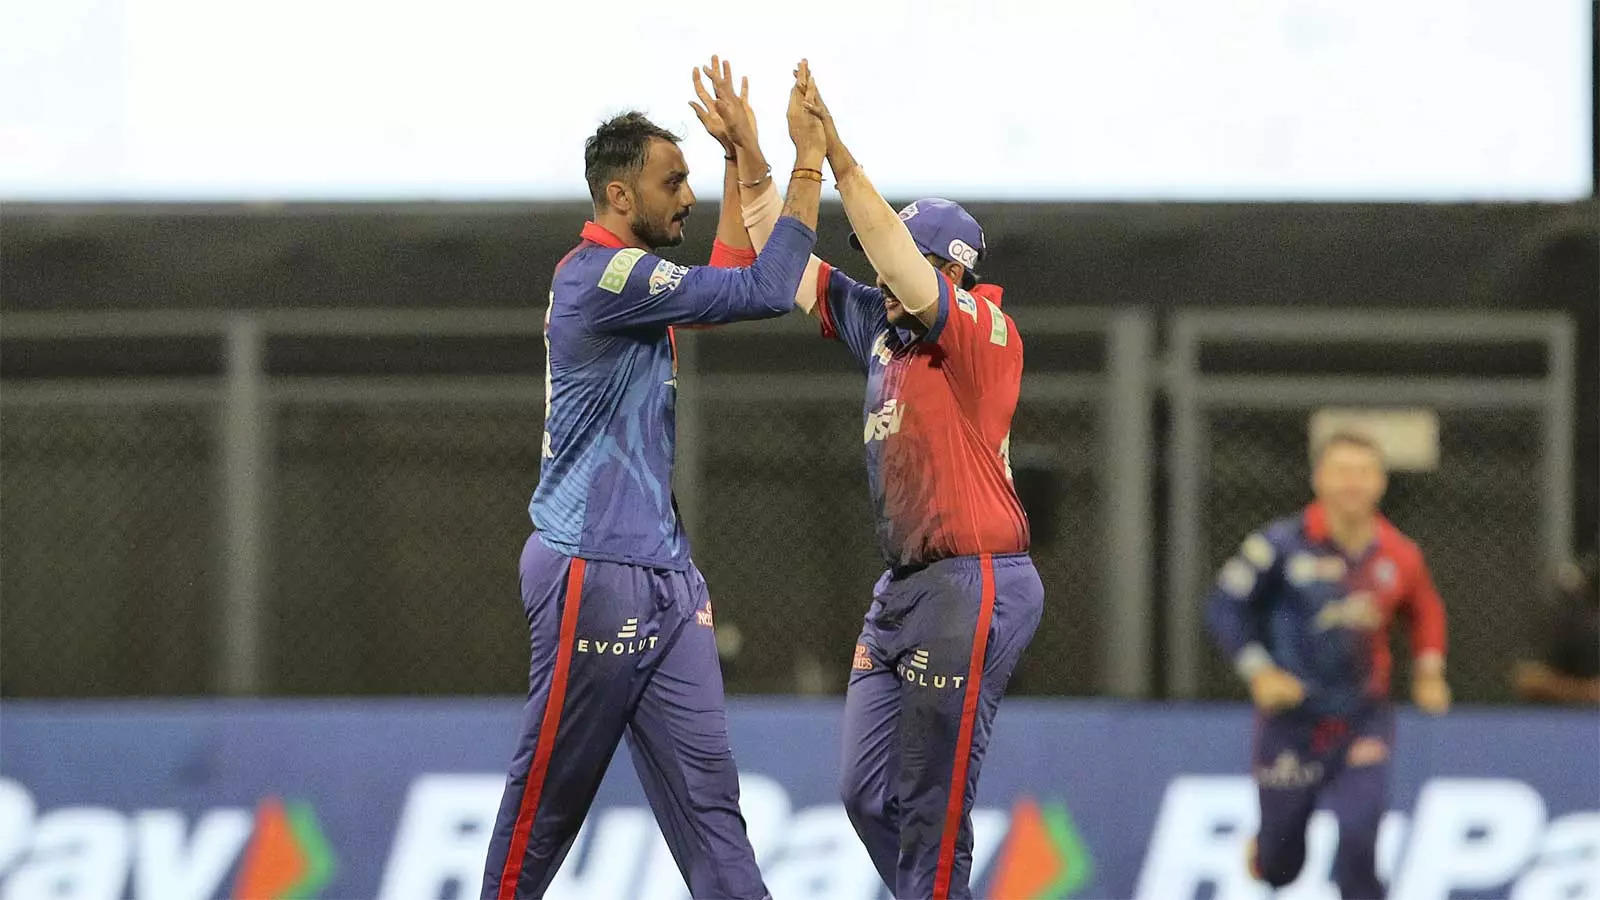 Delhi Capitals were hit by Covid-19 ahead of RCB match